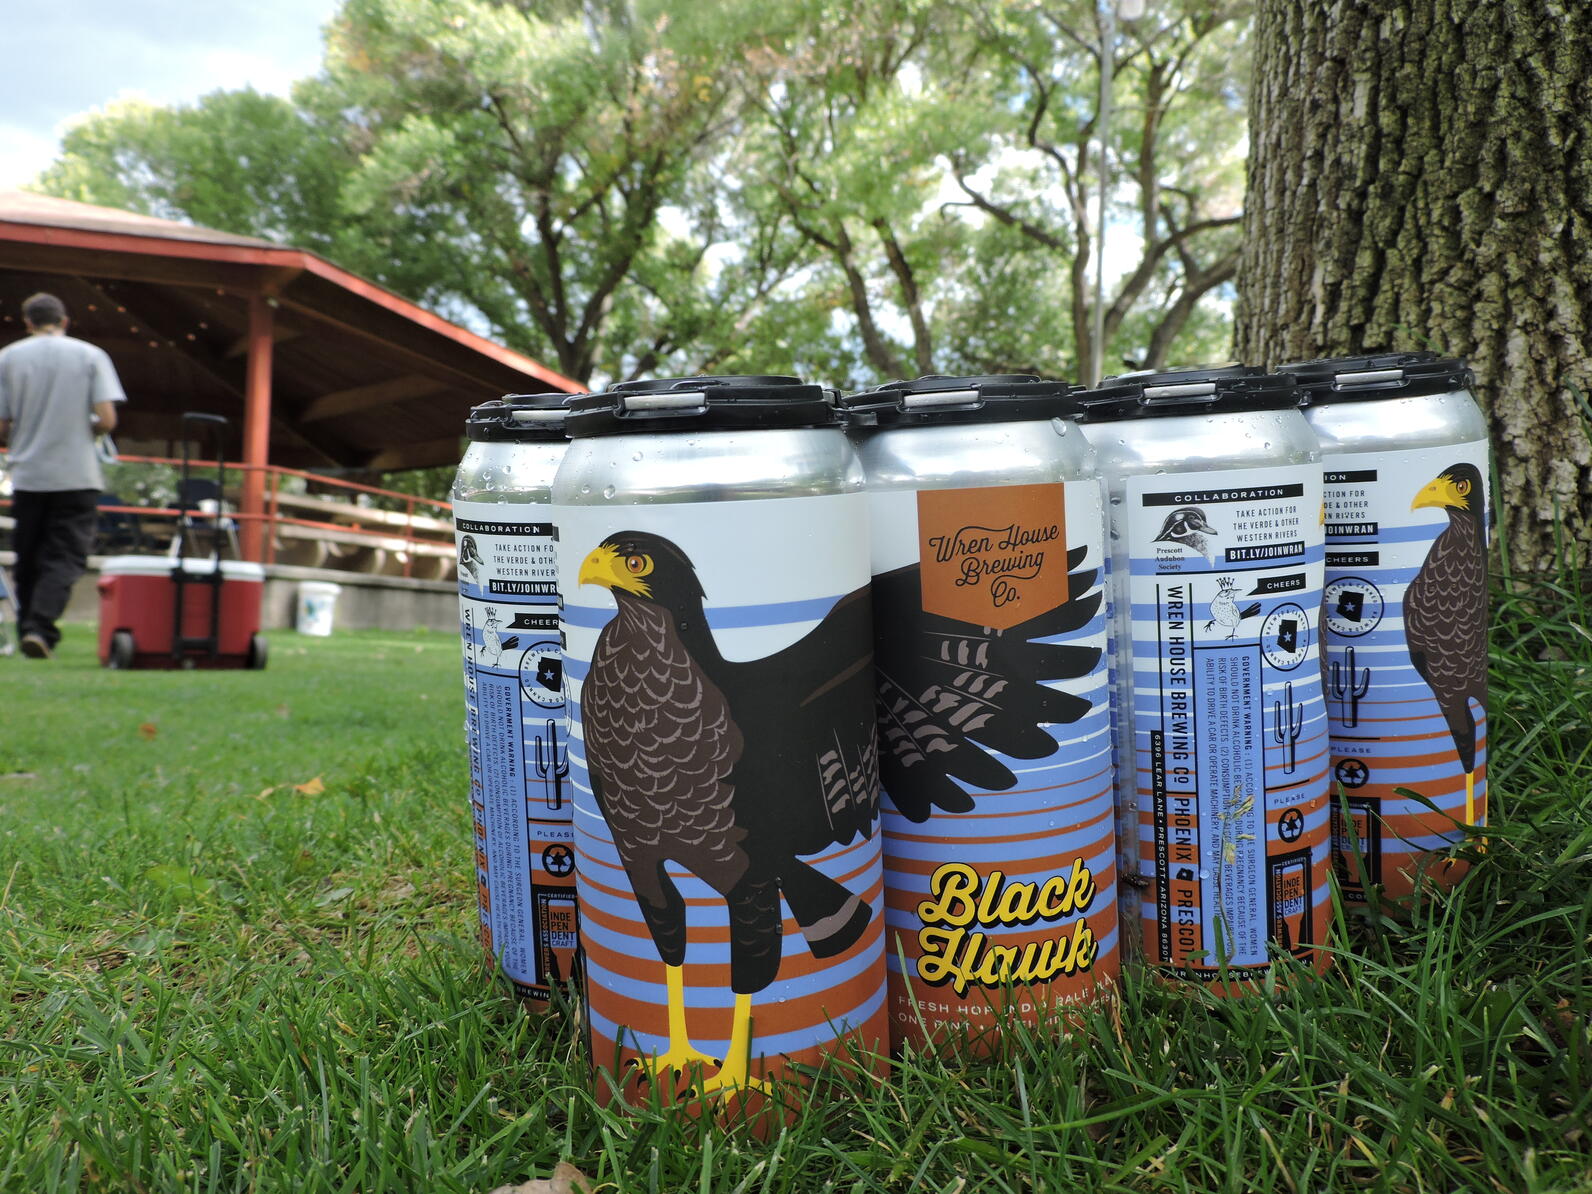 A four pack of Black Hawk IPA sits in the grass beside a large tree.  In the background, Prescott Audubon volunteers can be seen setting up for the evening's event.